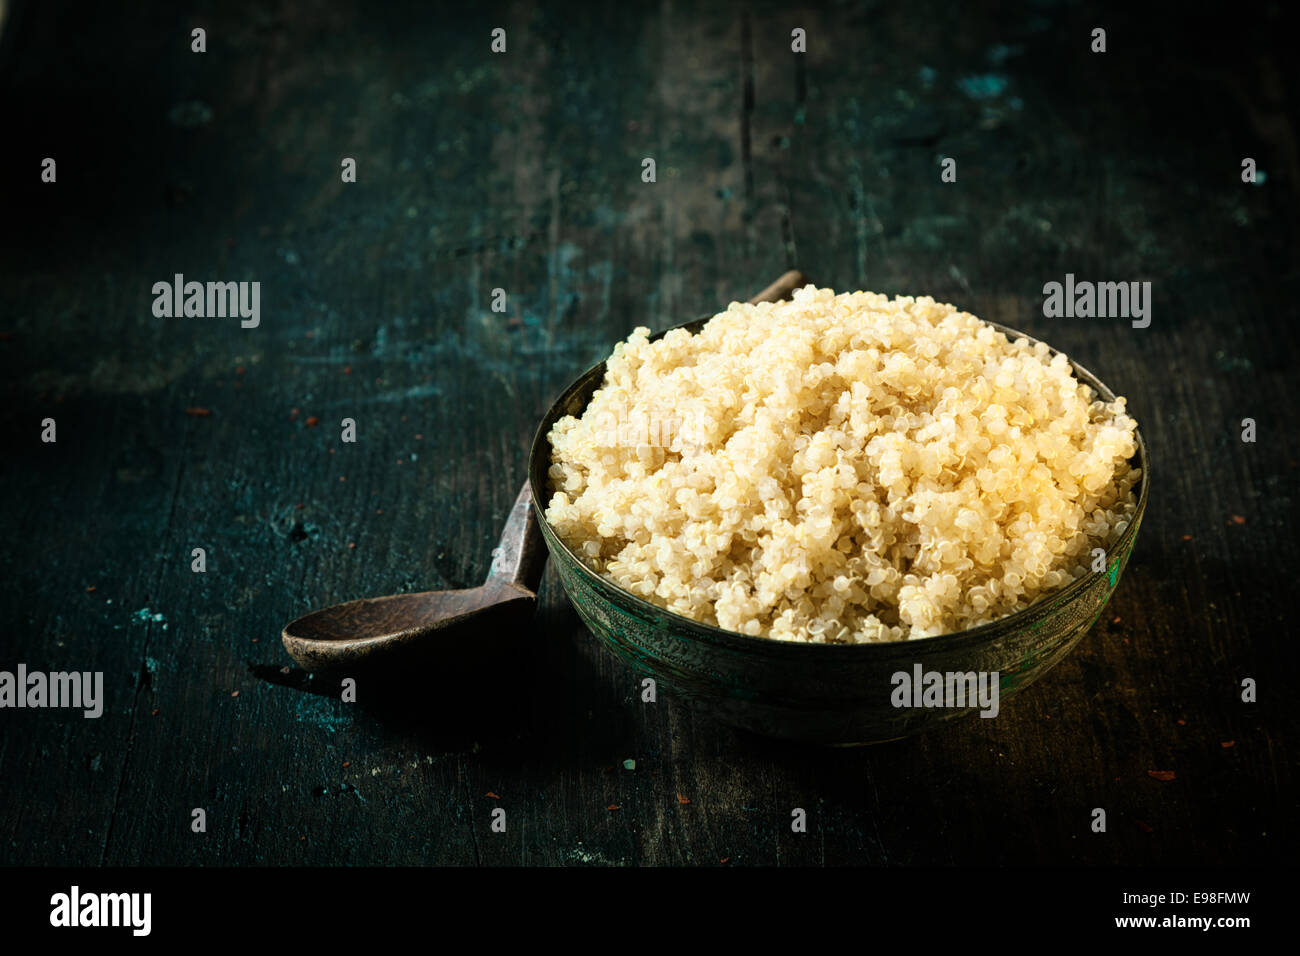 Bowl of steamed healthy quinoa, a pseudo-cereal rich in protein hailed as a superfood for its nutritional qualities, on a dark background with copyspace Stock Photo